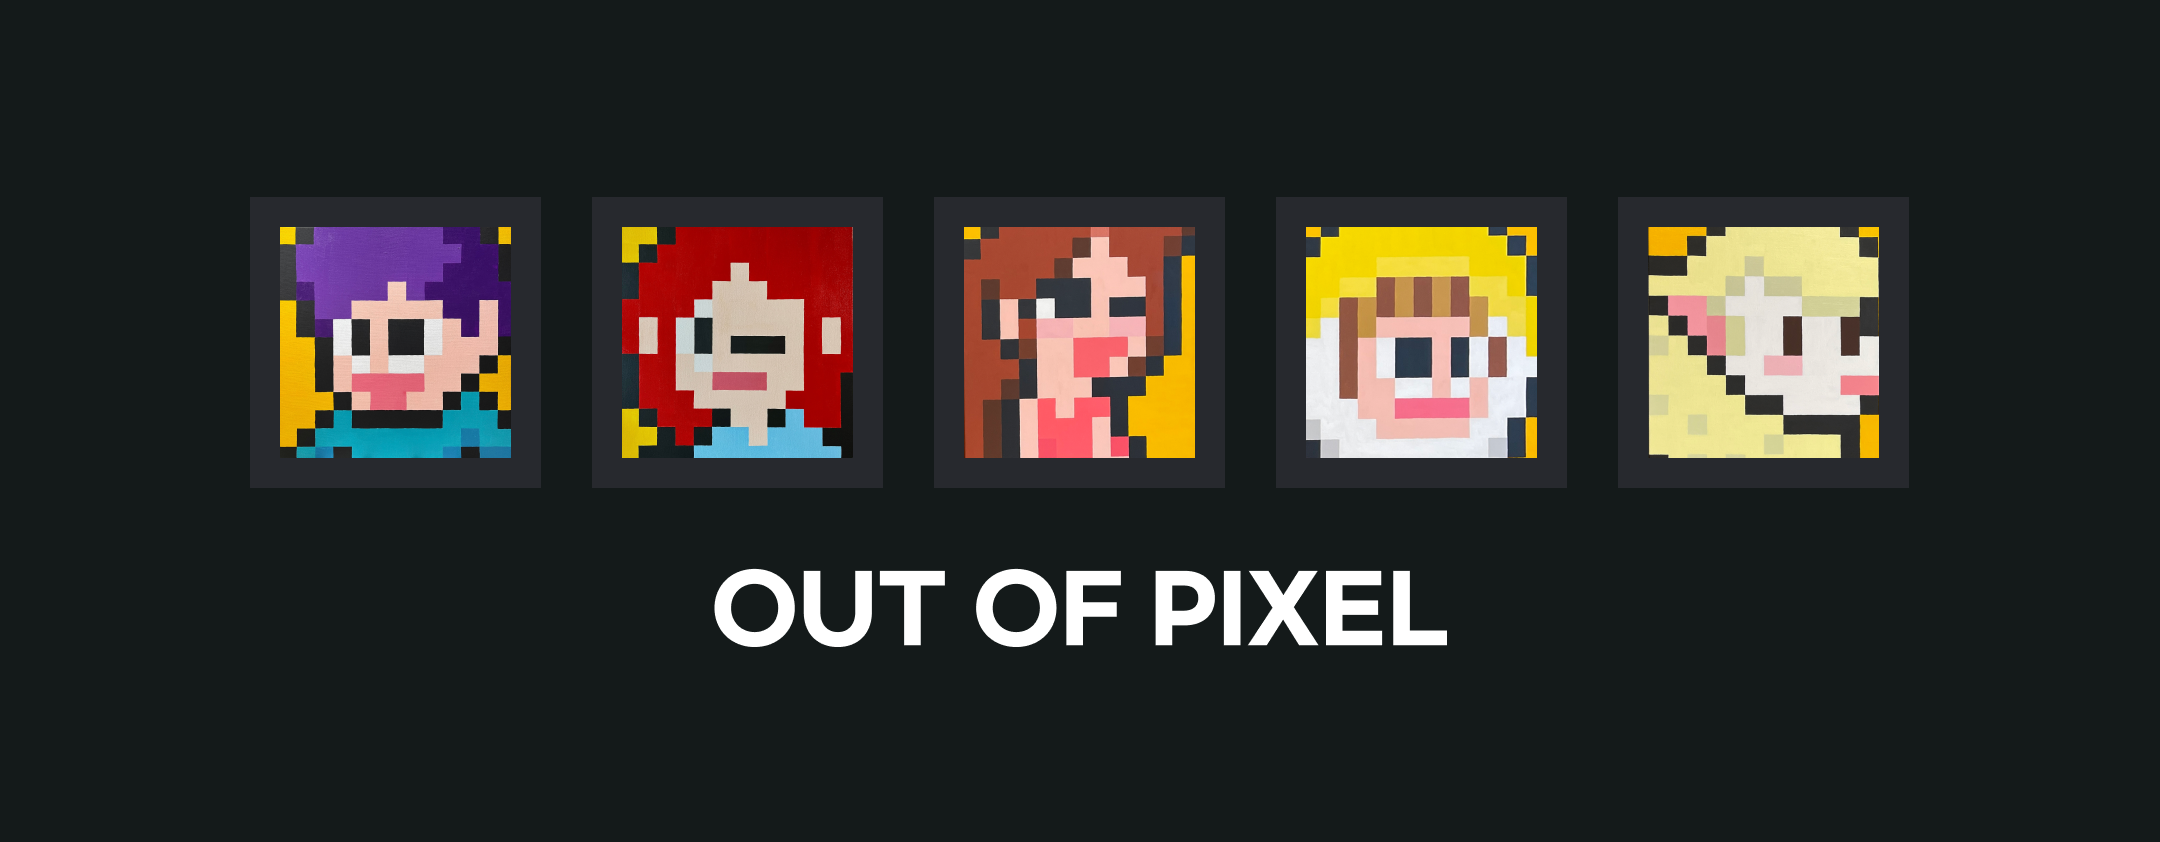 Out of pixel - LAYLAY